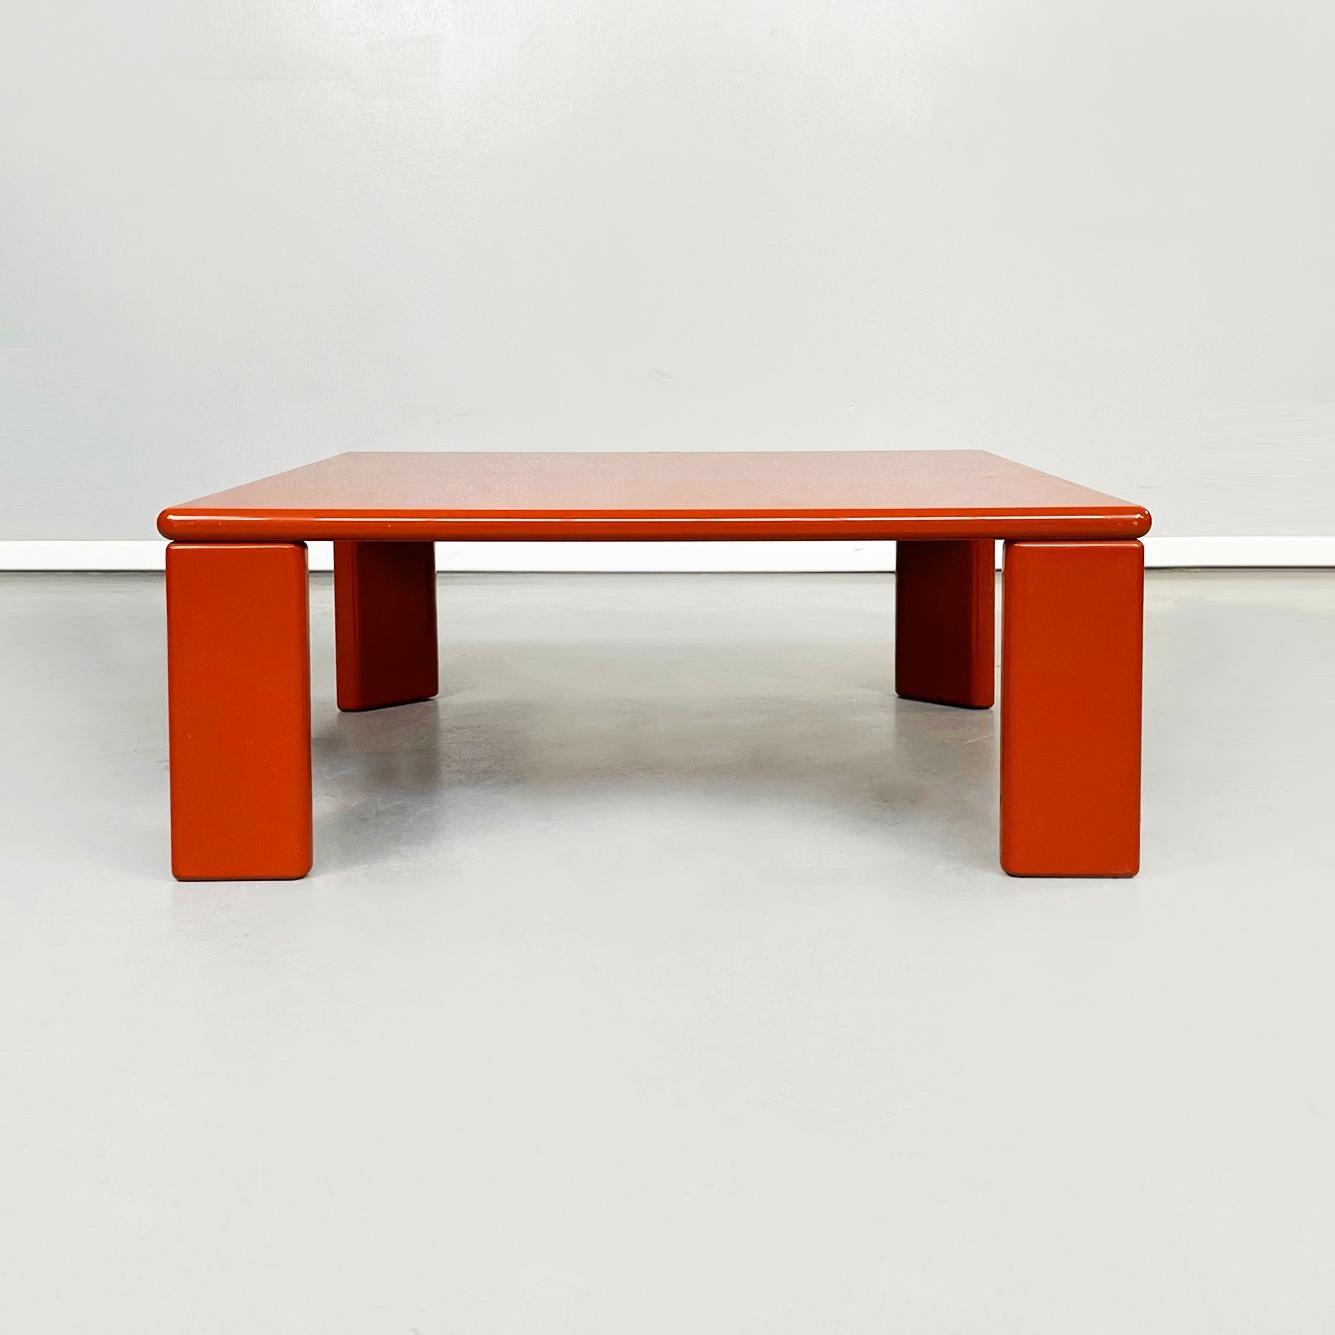 Italian mid-century red wooden coffee table Ming by Takahama for Gavina, 1980s.
Square coffee table model Ming in red lacquered wood. The 4 legs are triangular in shape with rounded corners.
Produced by Gavina in 1980s and designed by Kazuhide